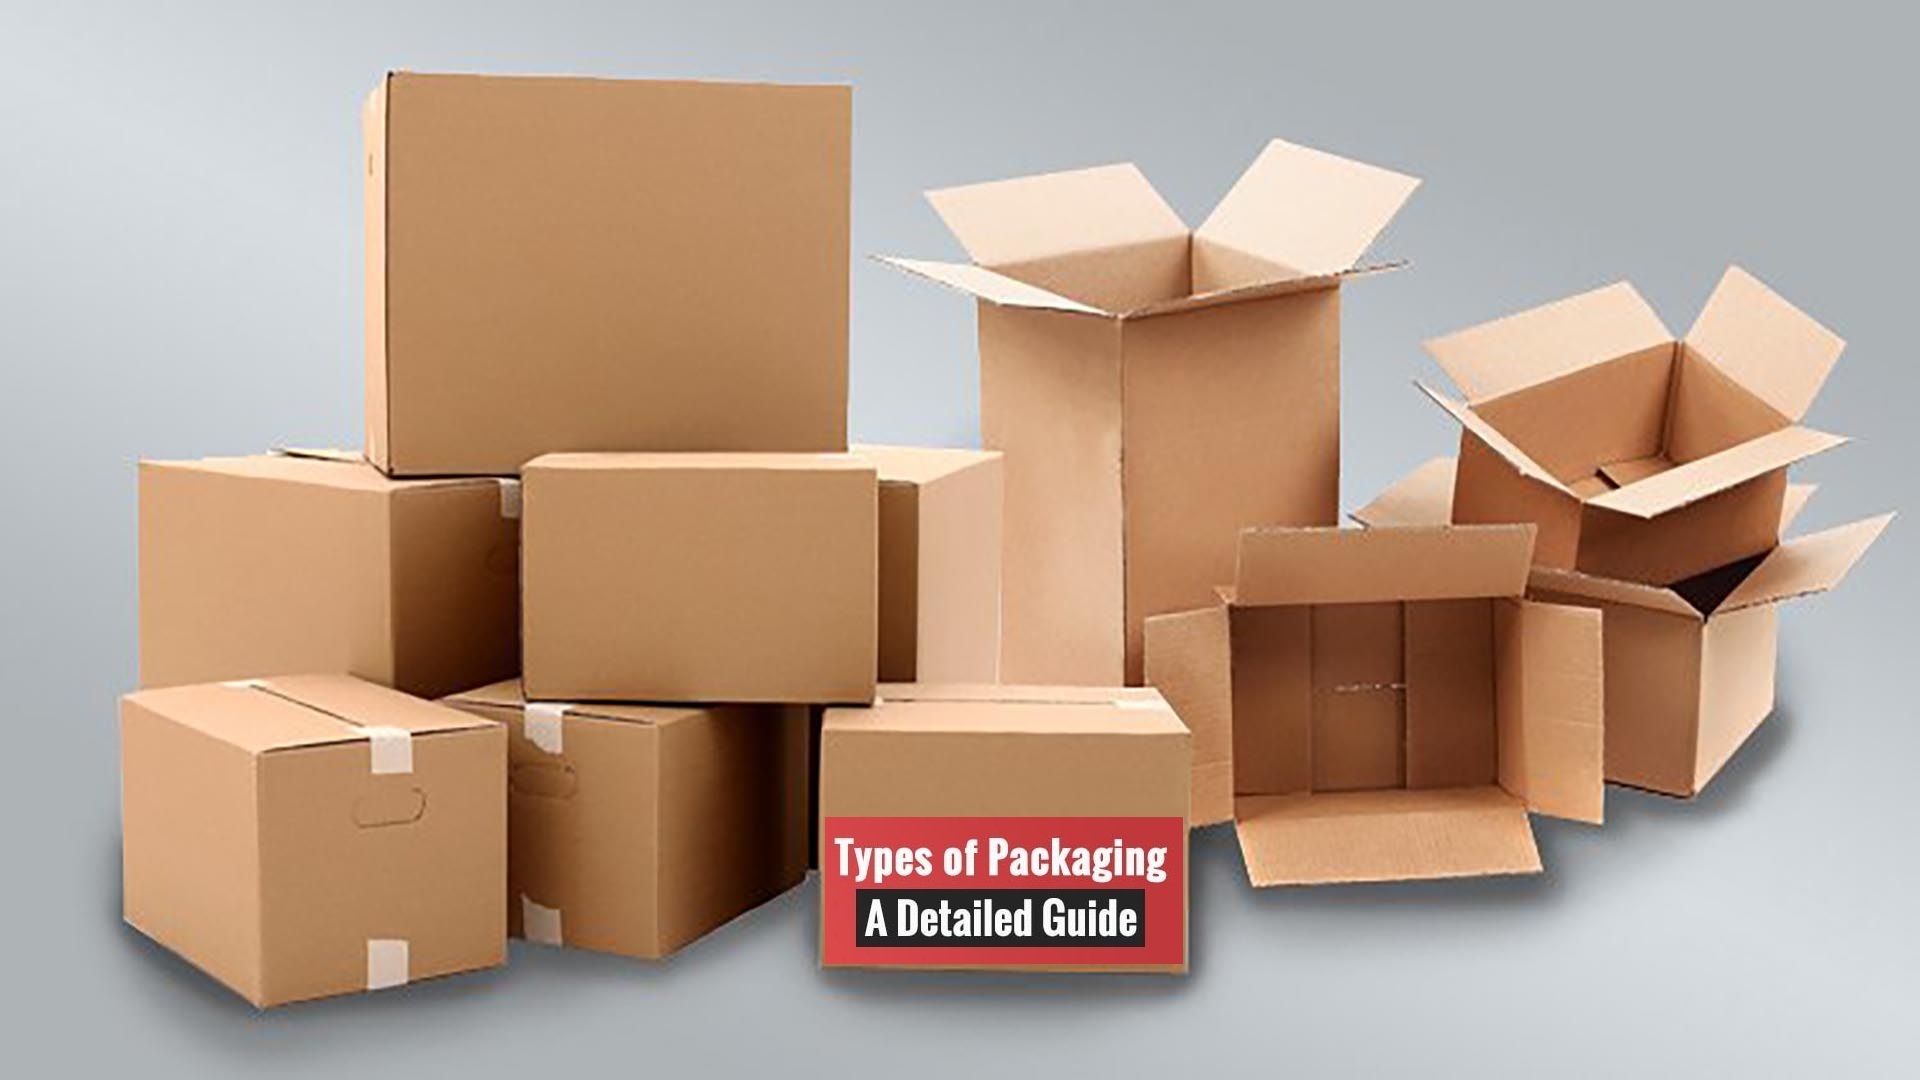 What Are the Different Types of Packaging